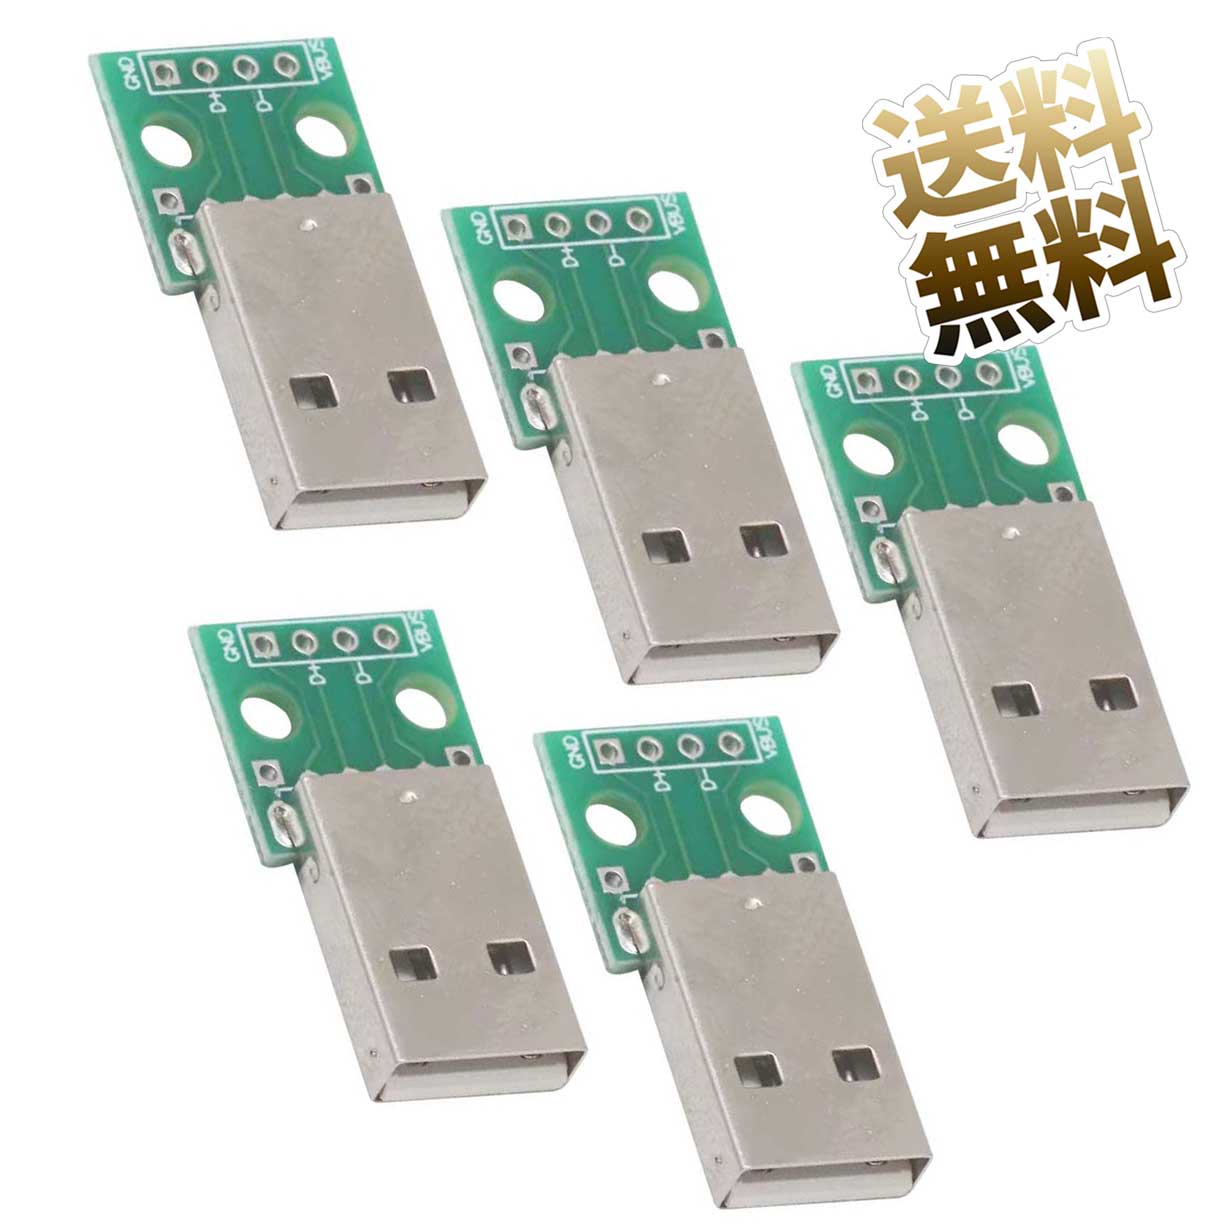 USB2.0 Type-A オスソケット S 4Pアダプタ 5点セット プリント基板付き 自作